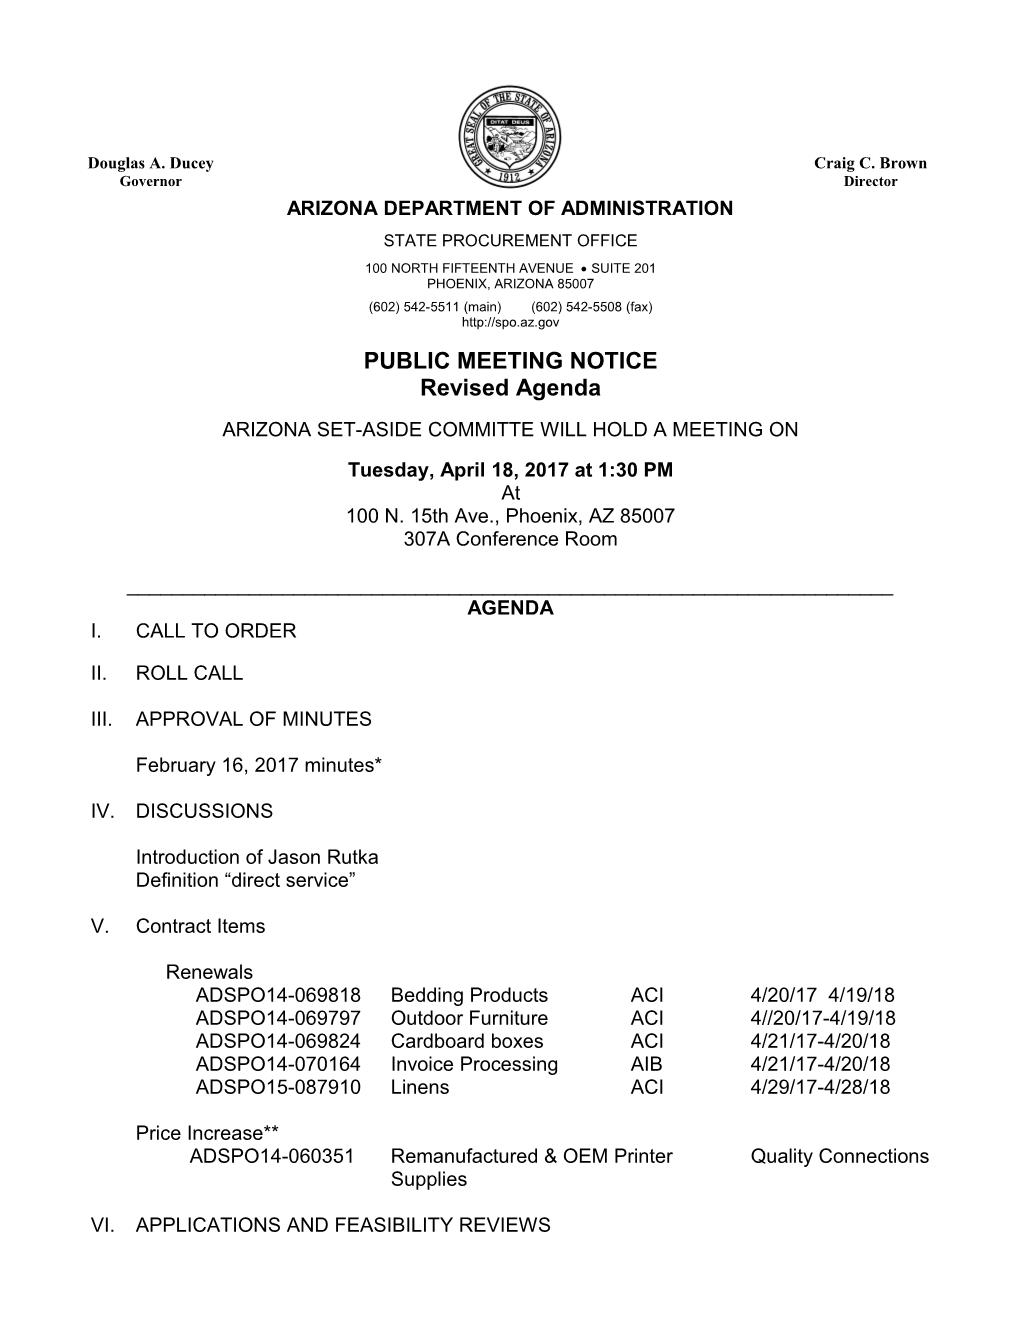 Set-Aside Committee Public Meeting Notice